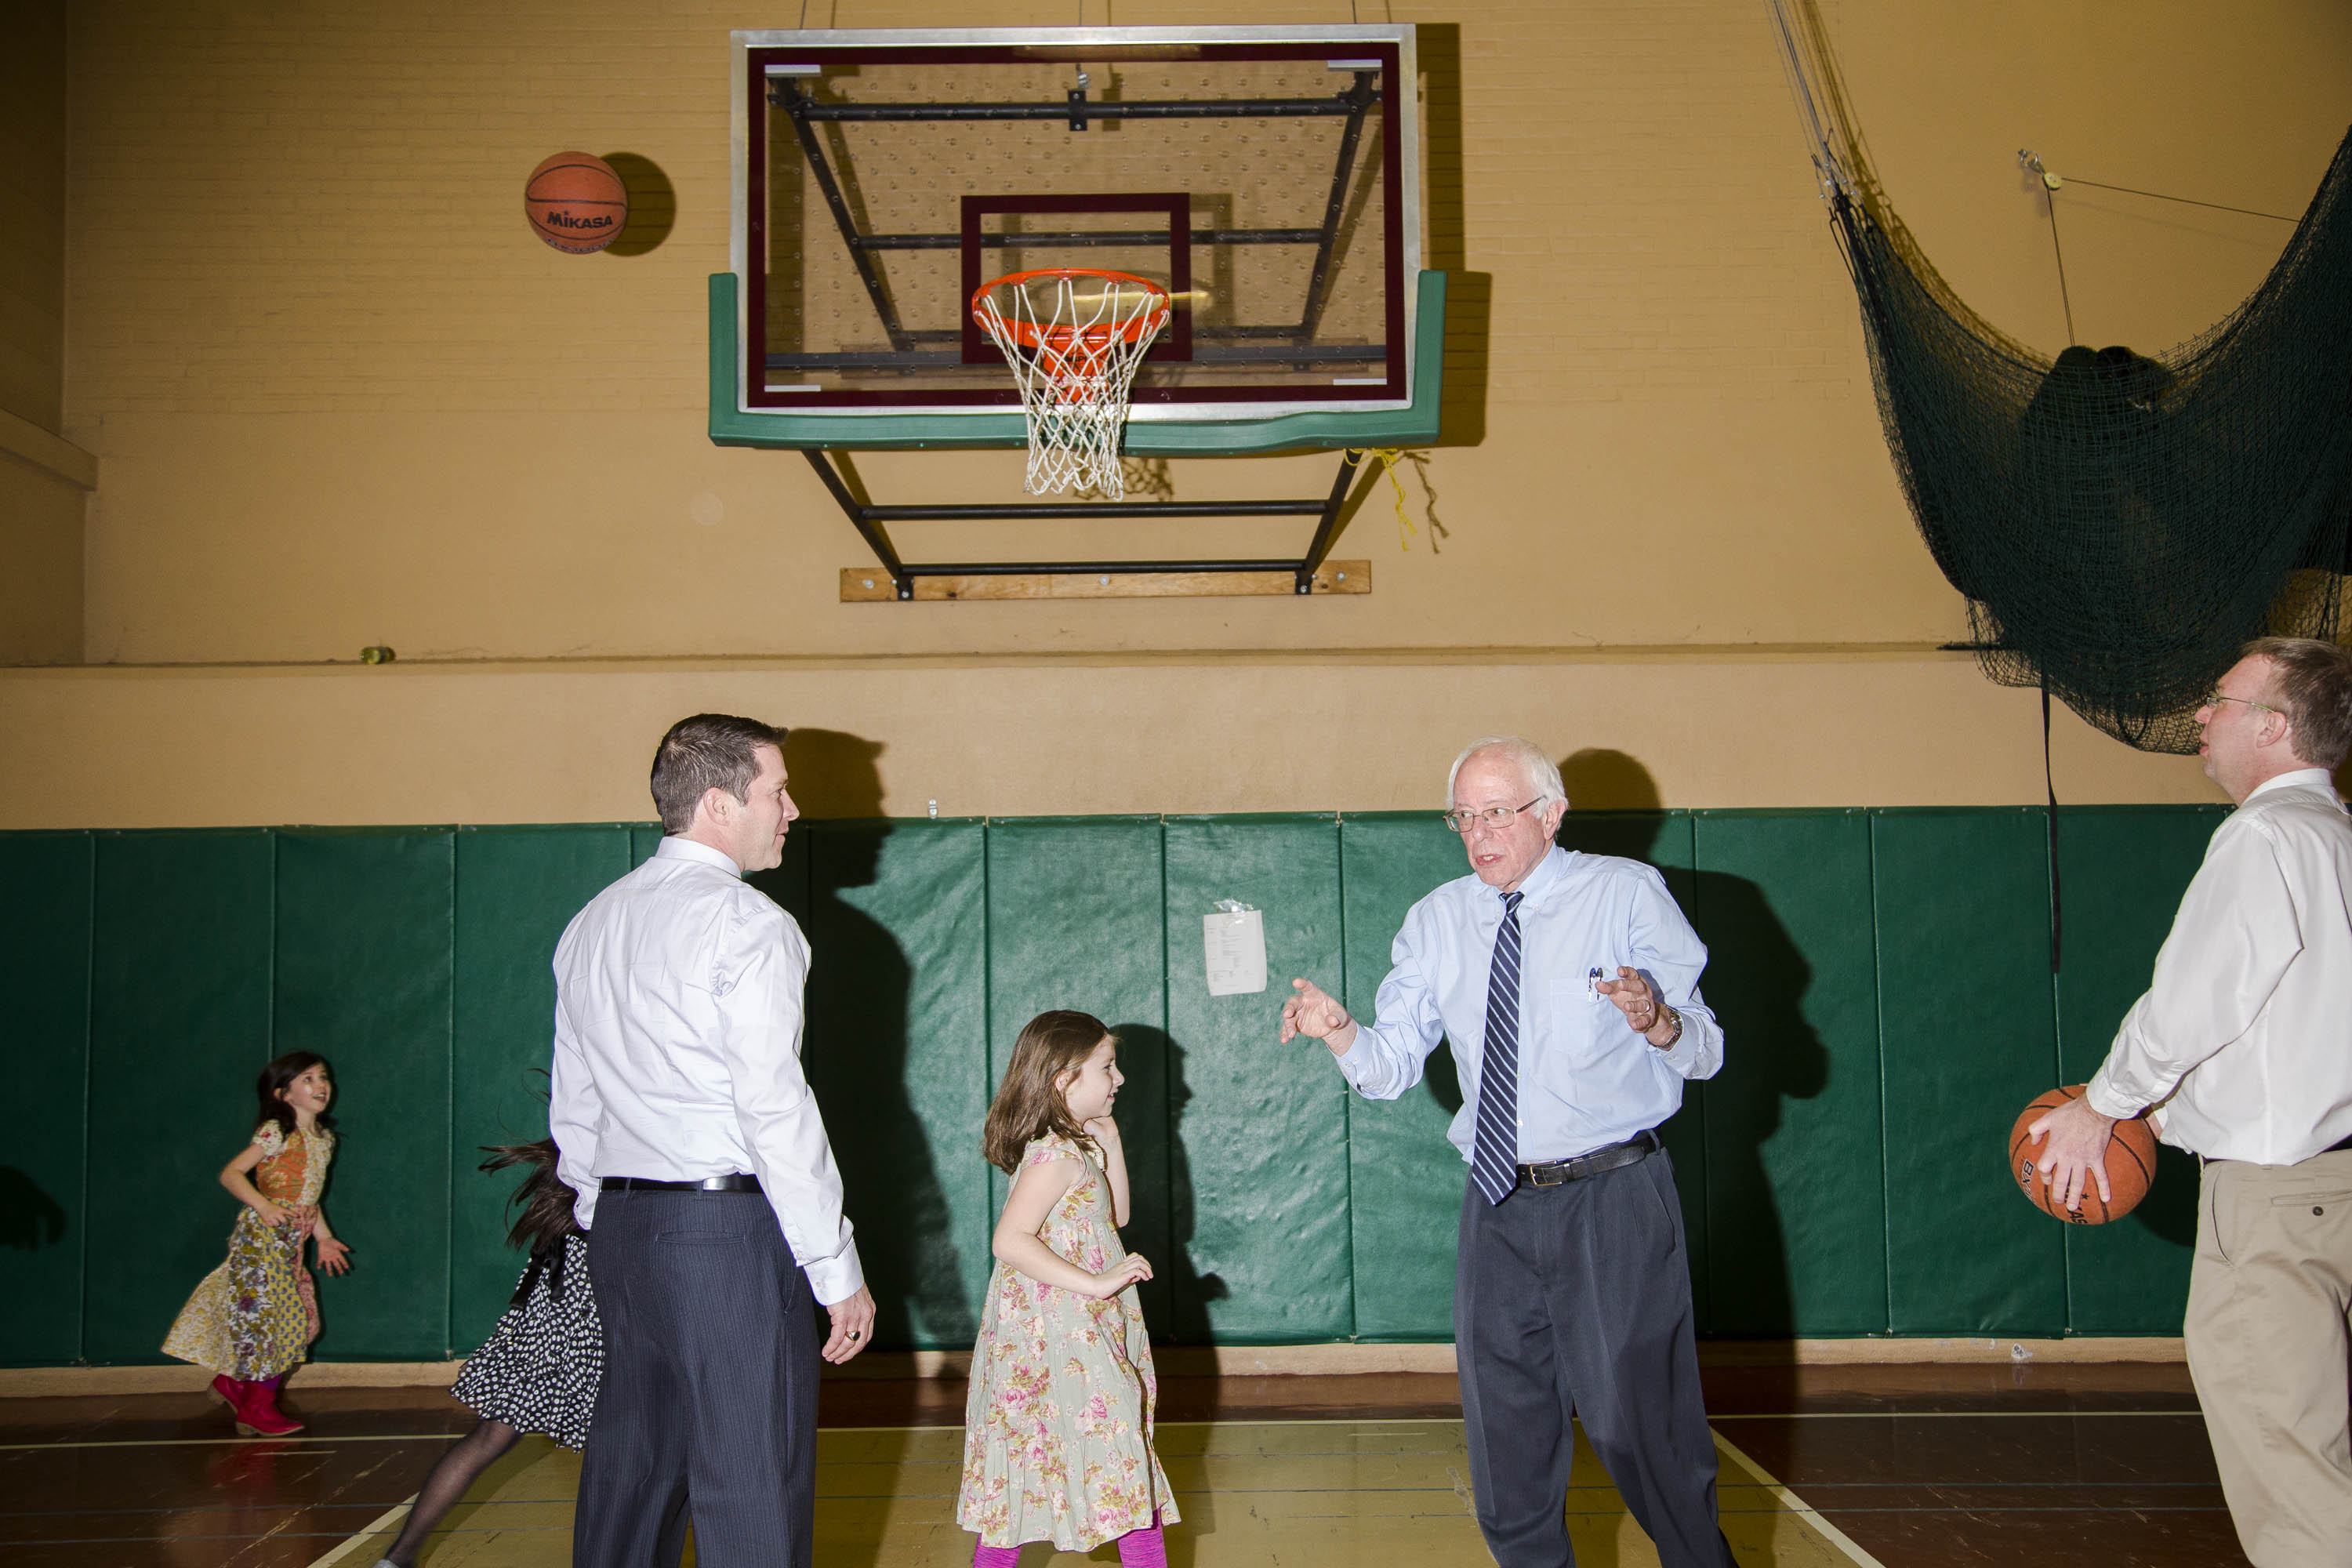 Democratic presidential candidate, Vermont Sen. Bernie Sanders shoots hoops with family at Concord High School on Feb. 9, 2016, in Concord, N.H.